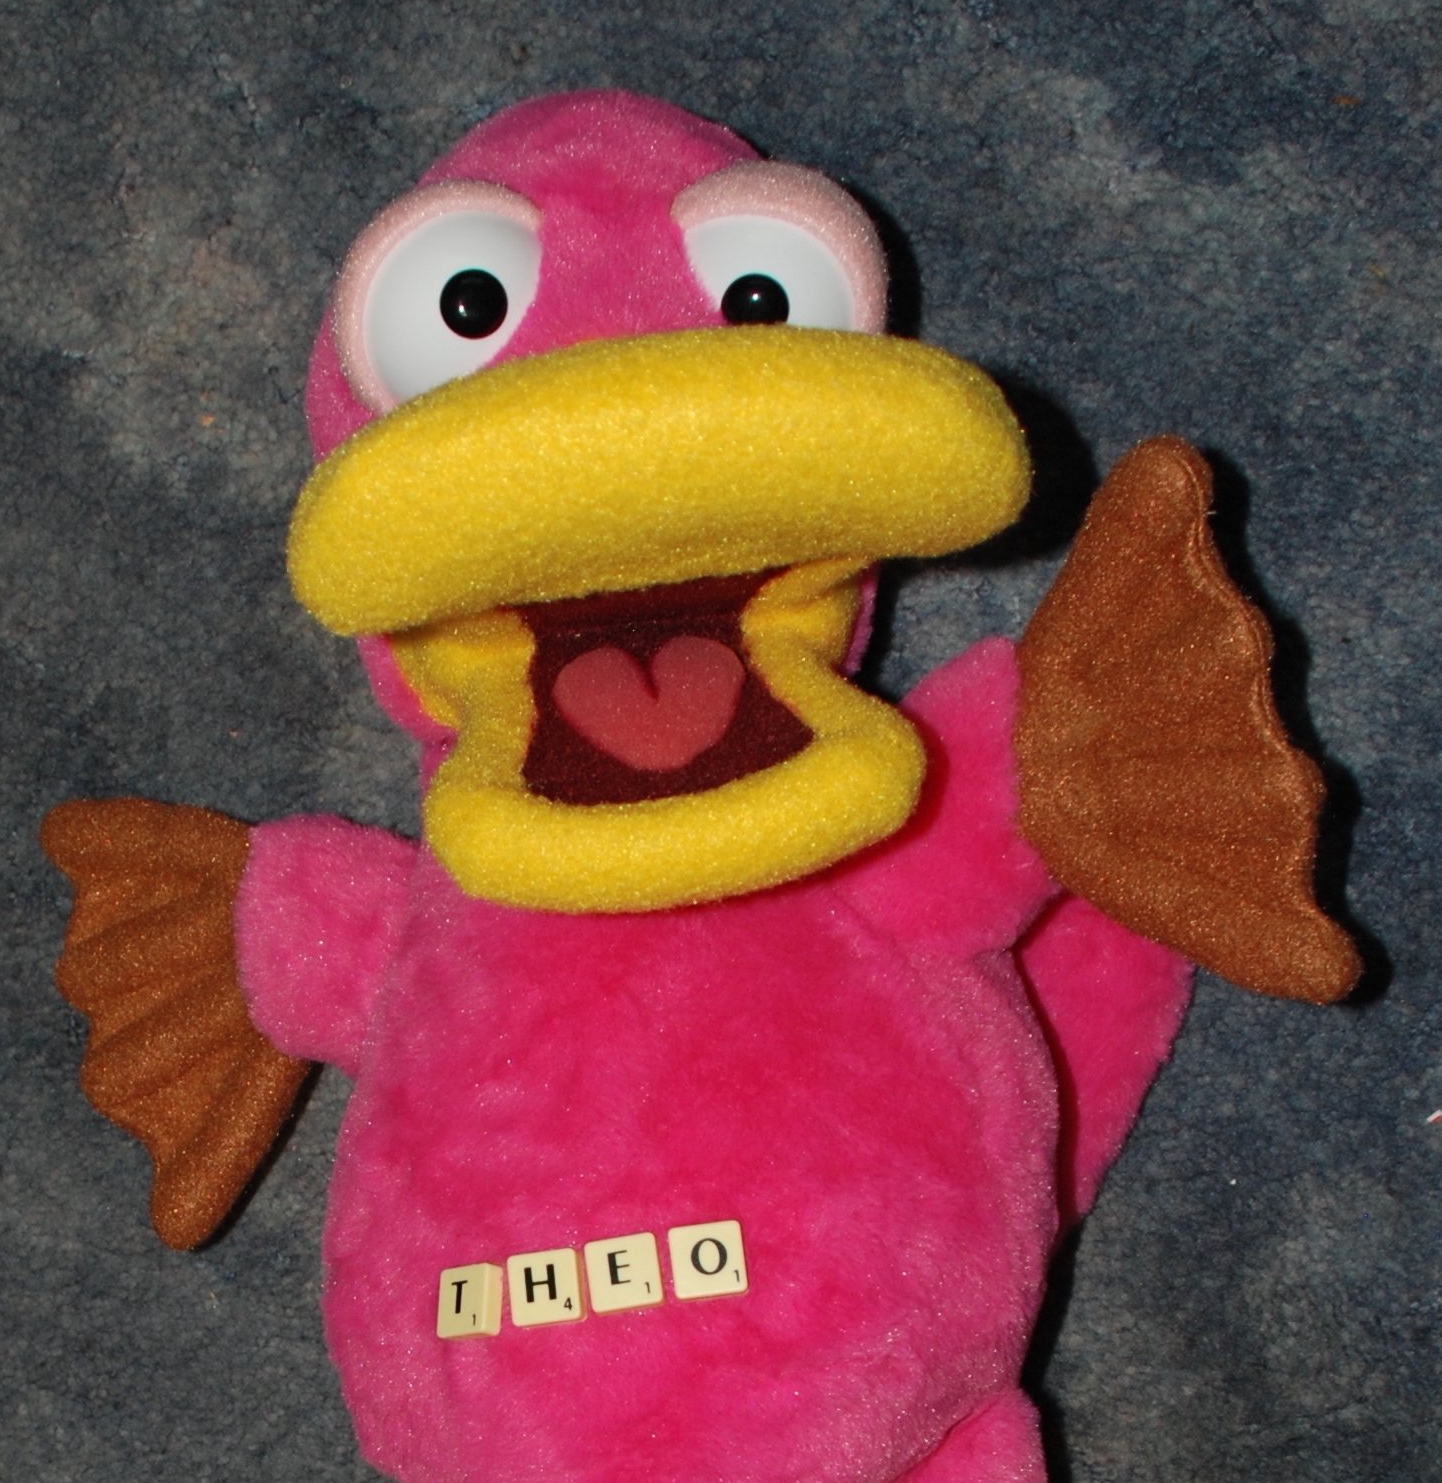 Theo Platypus with scrabble tiles on his tummy. They spell his name.